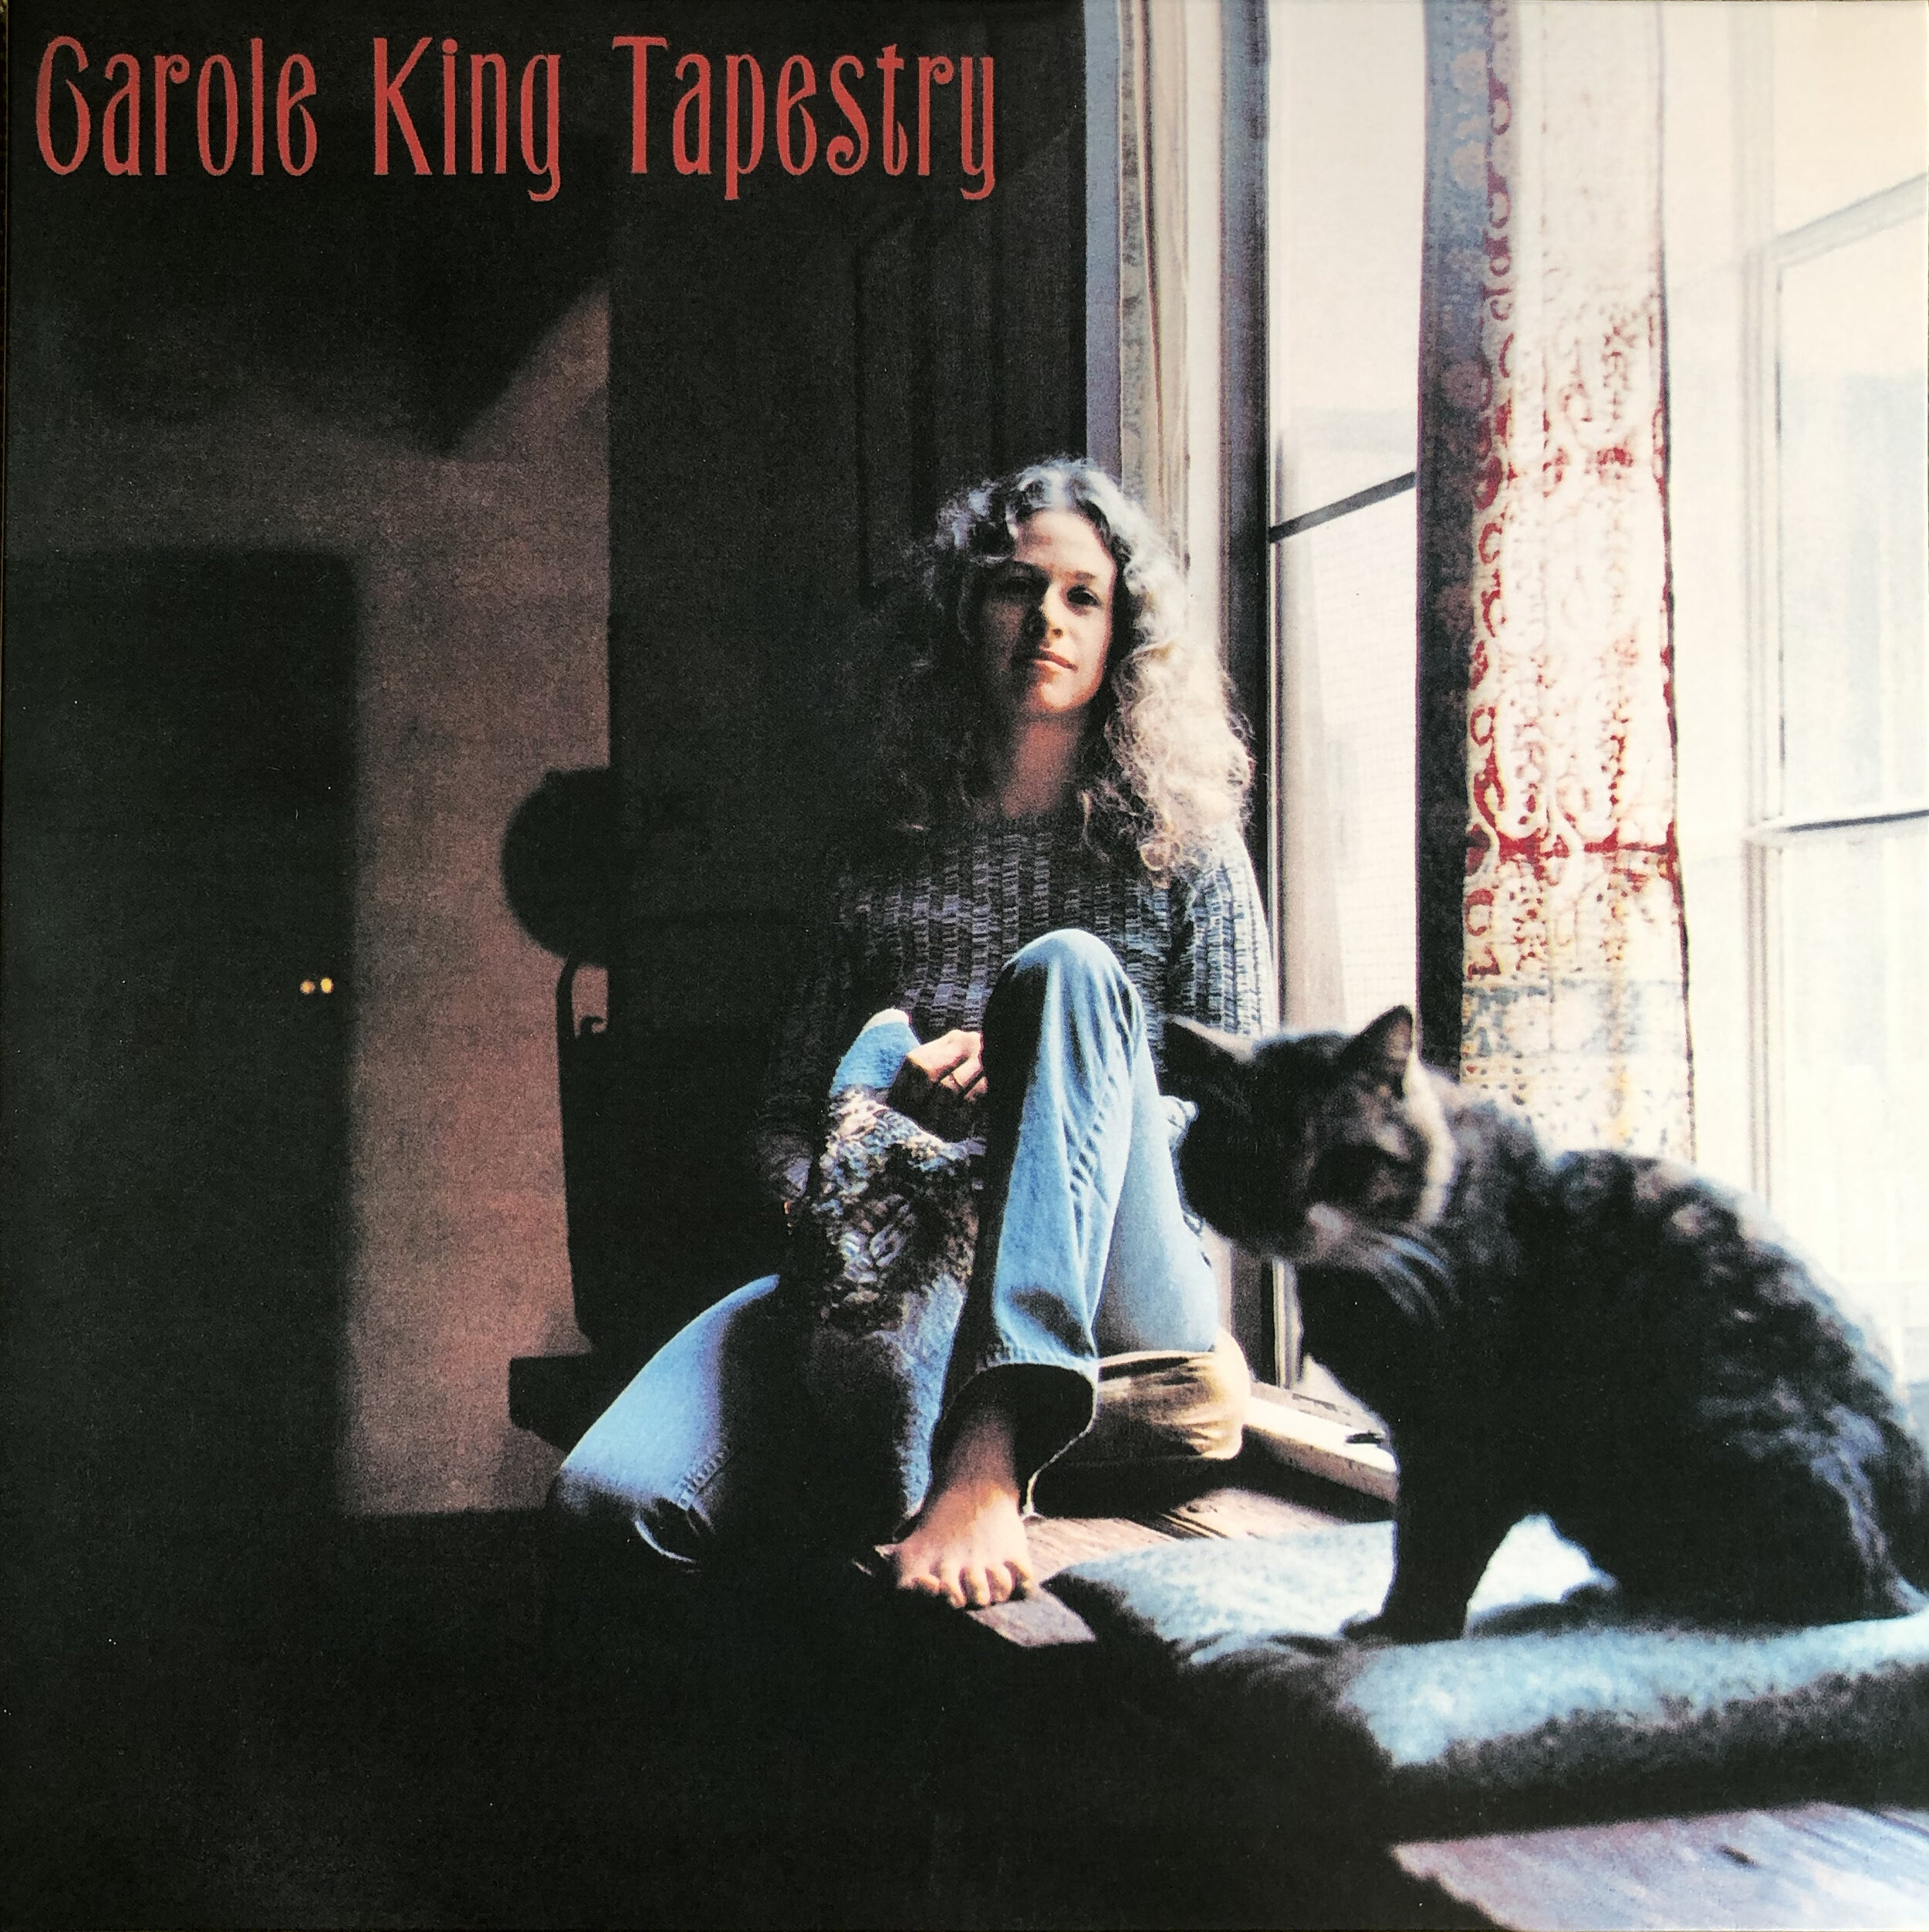 Cover of Carole King's Tapestry album